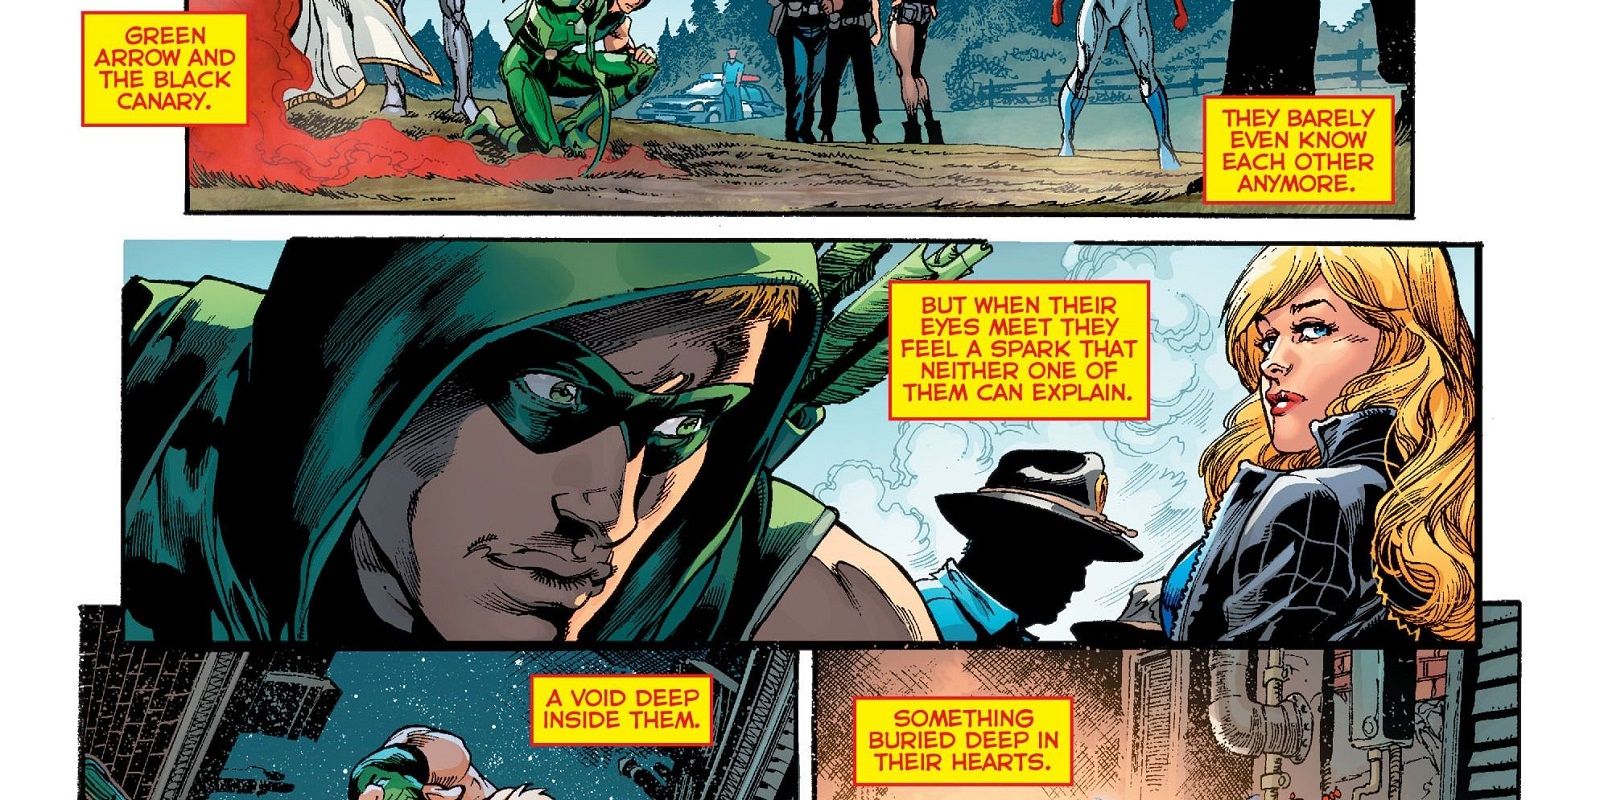 DC's Rebirth scene featuring Green Arrow and Black Canary remembering their relationship